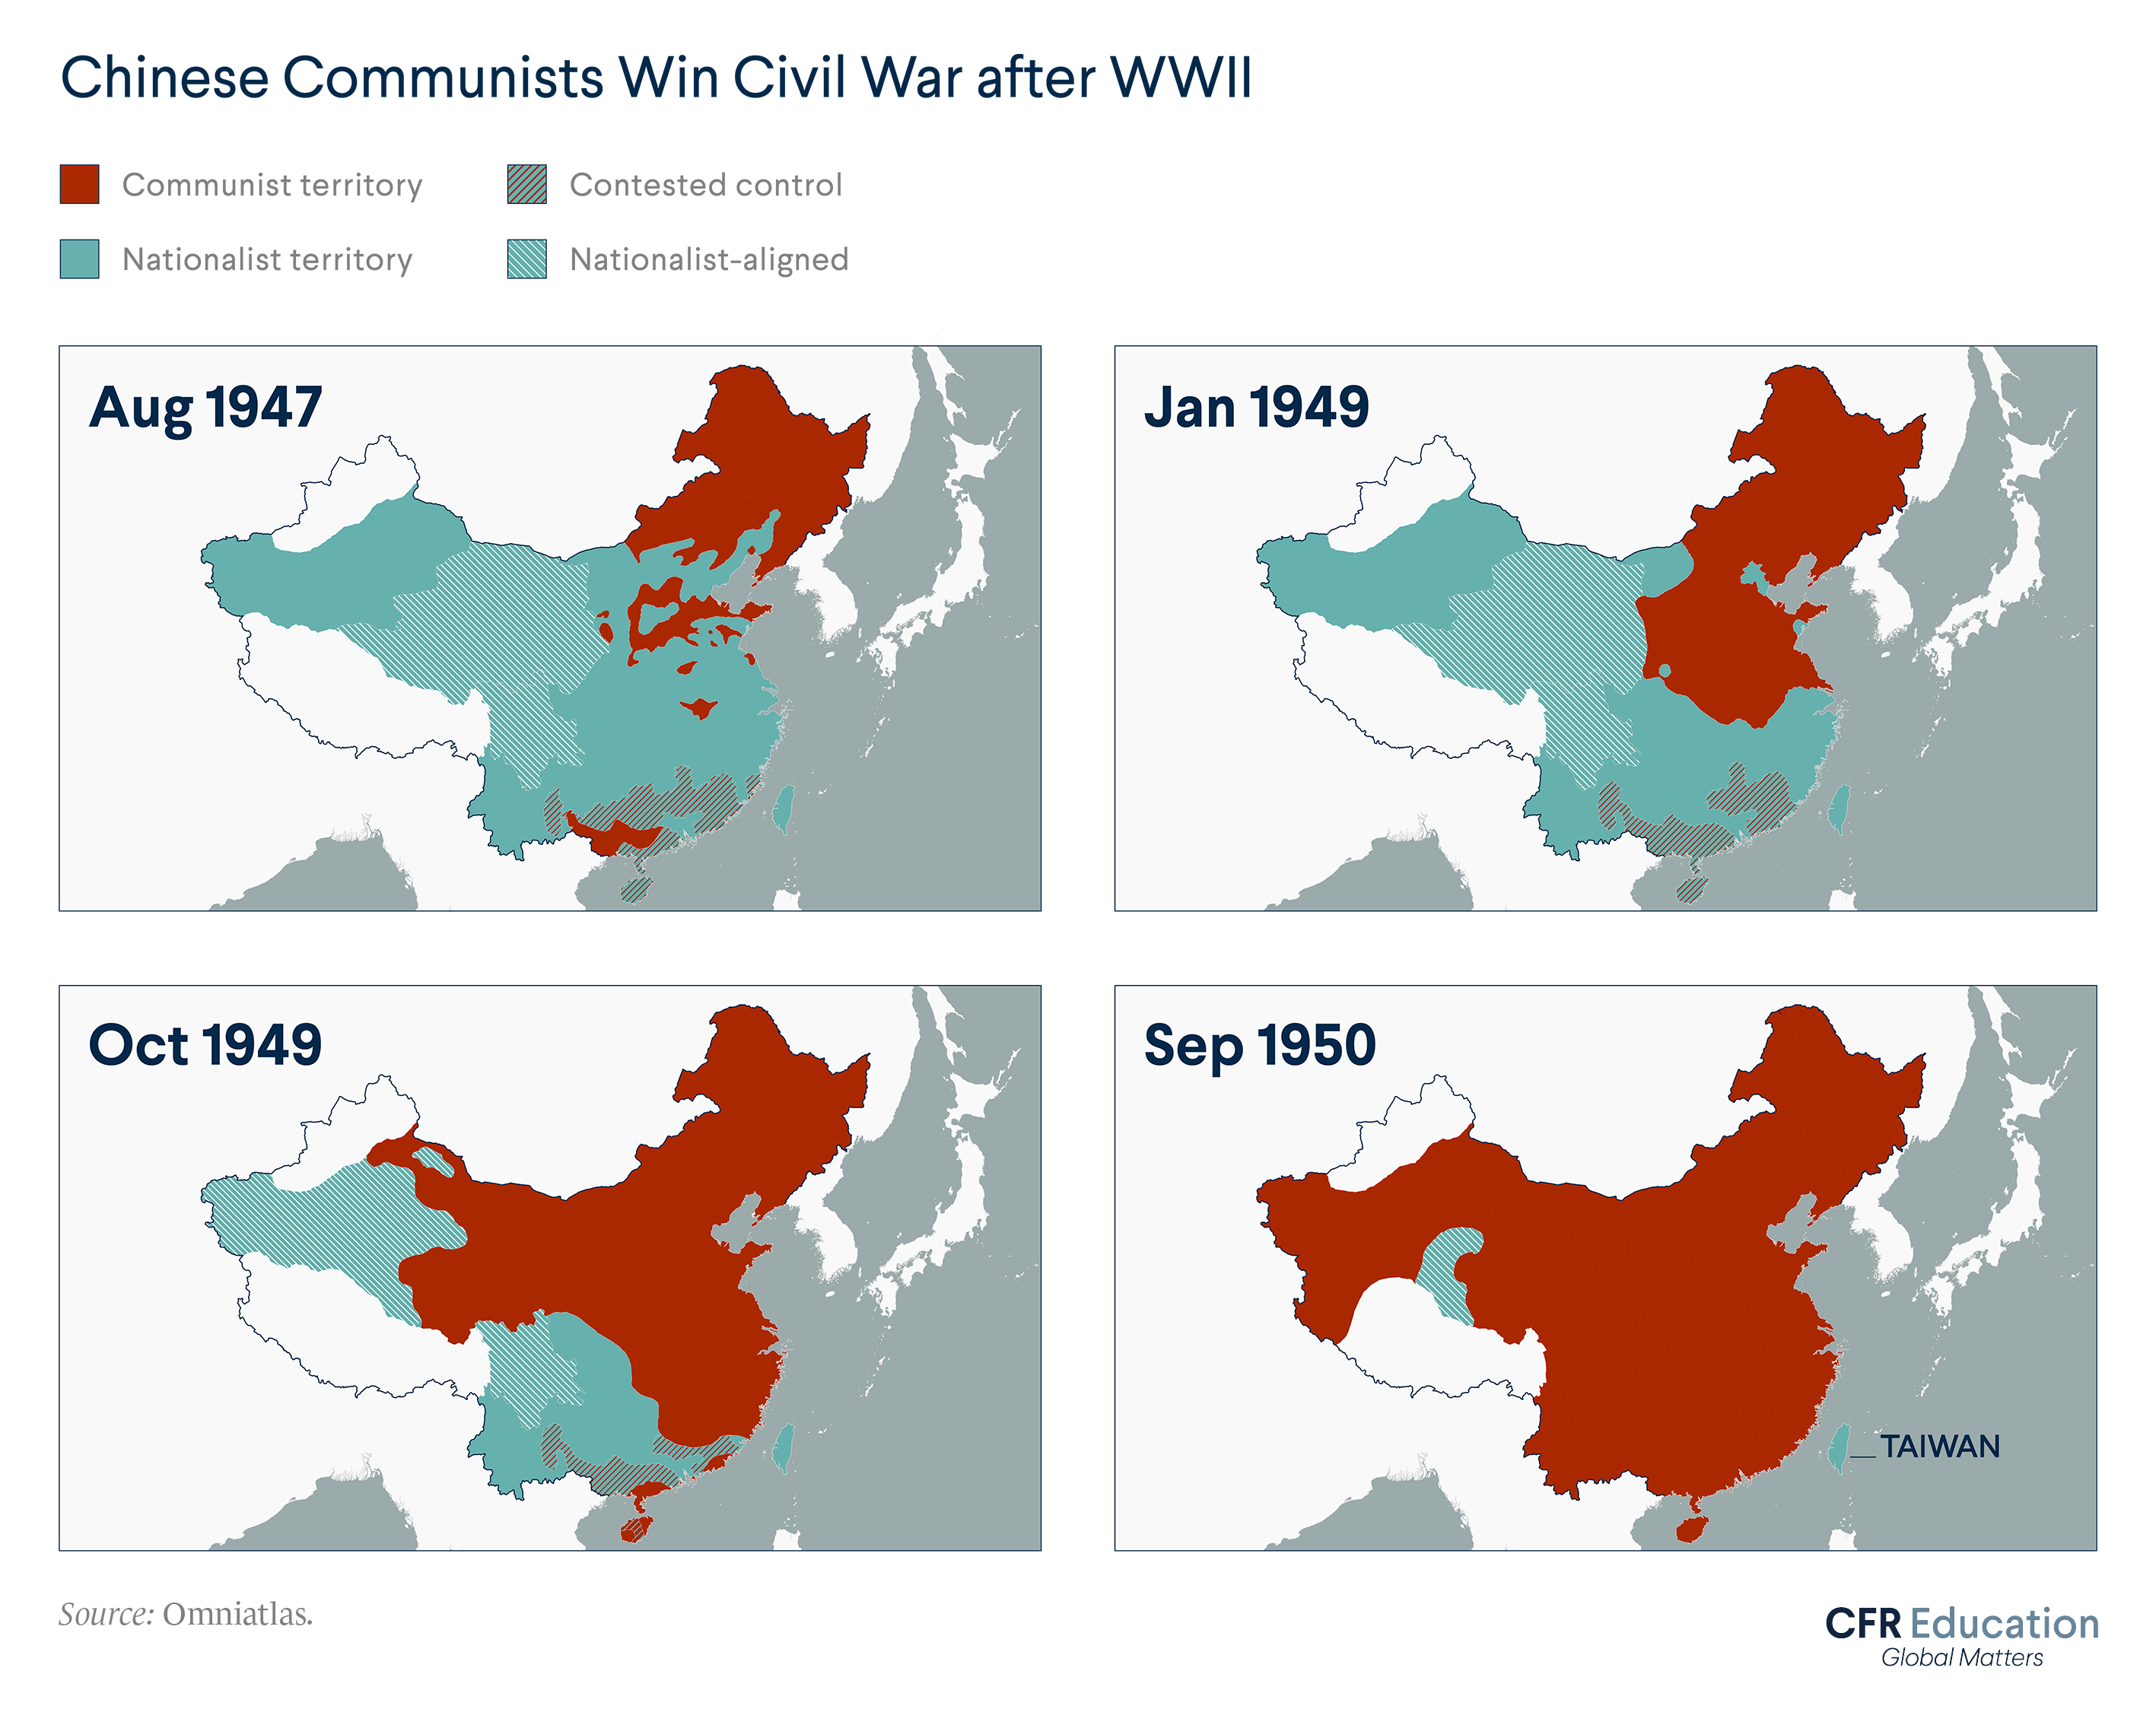 Maps show China, including Communist territories, Nationalist territories, Nationalist-aligned areas, and areas under contested control in August 1947, January 1949, October 1949, and September 1950. For more info contact us at cfr_education@cfr.org.